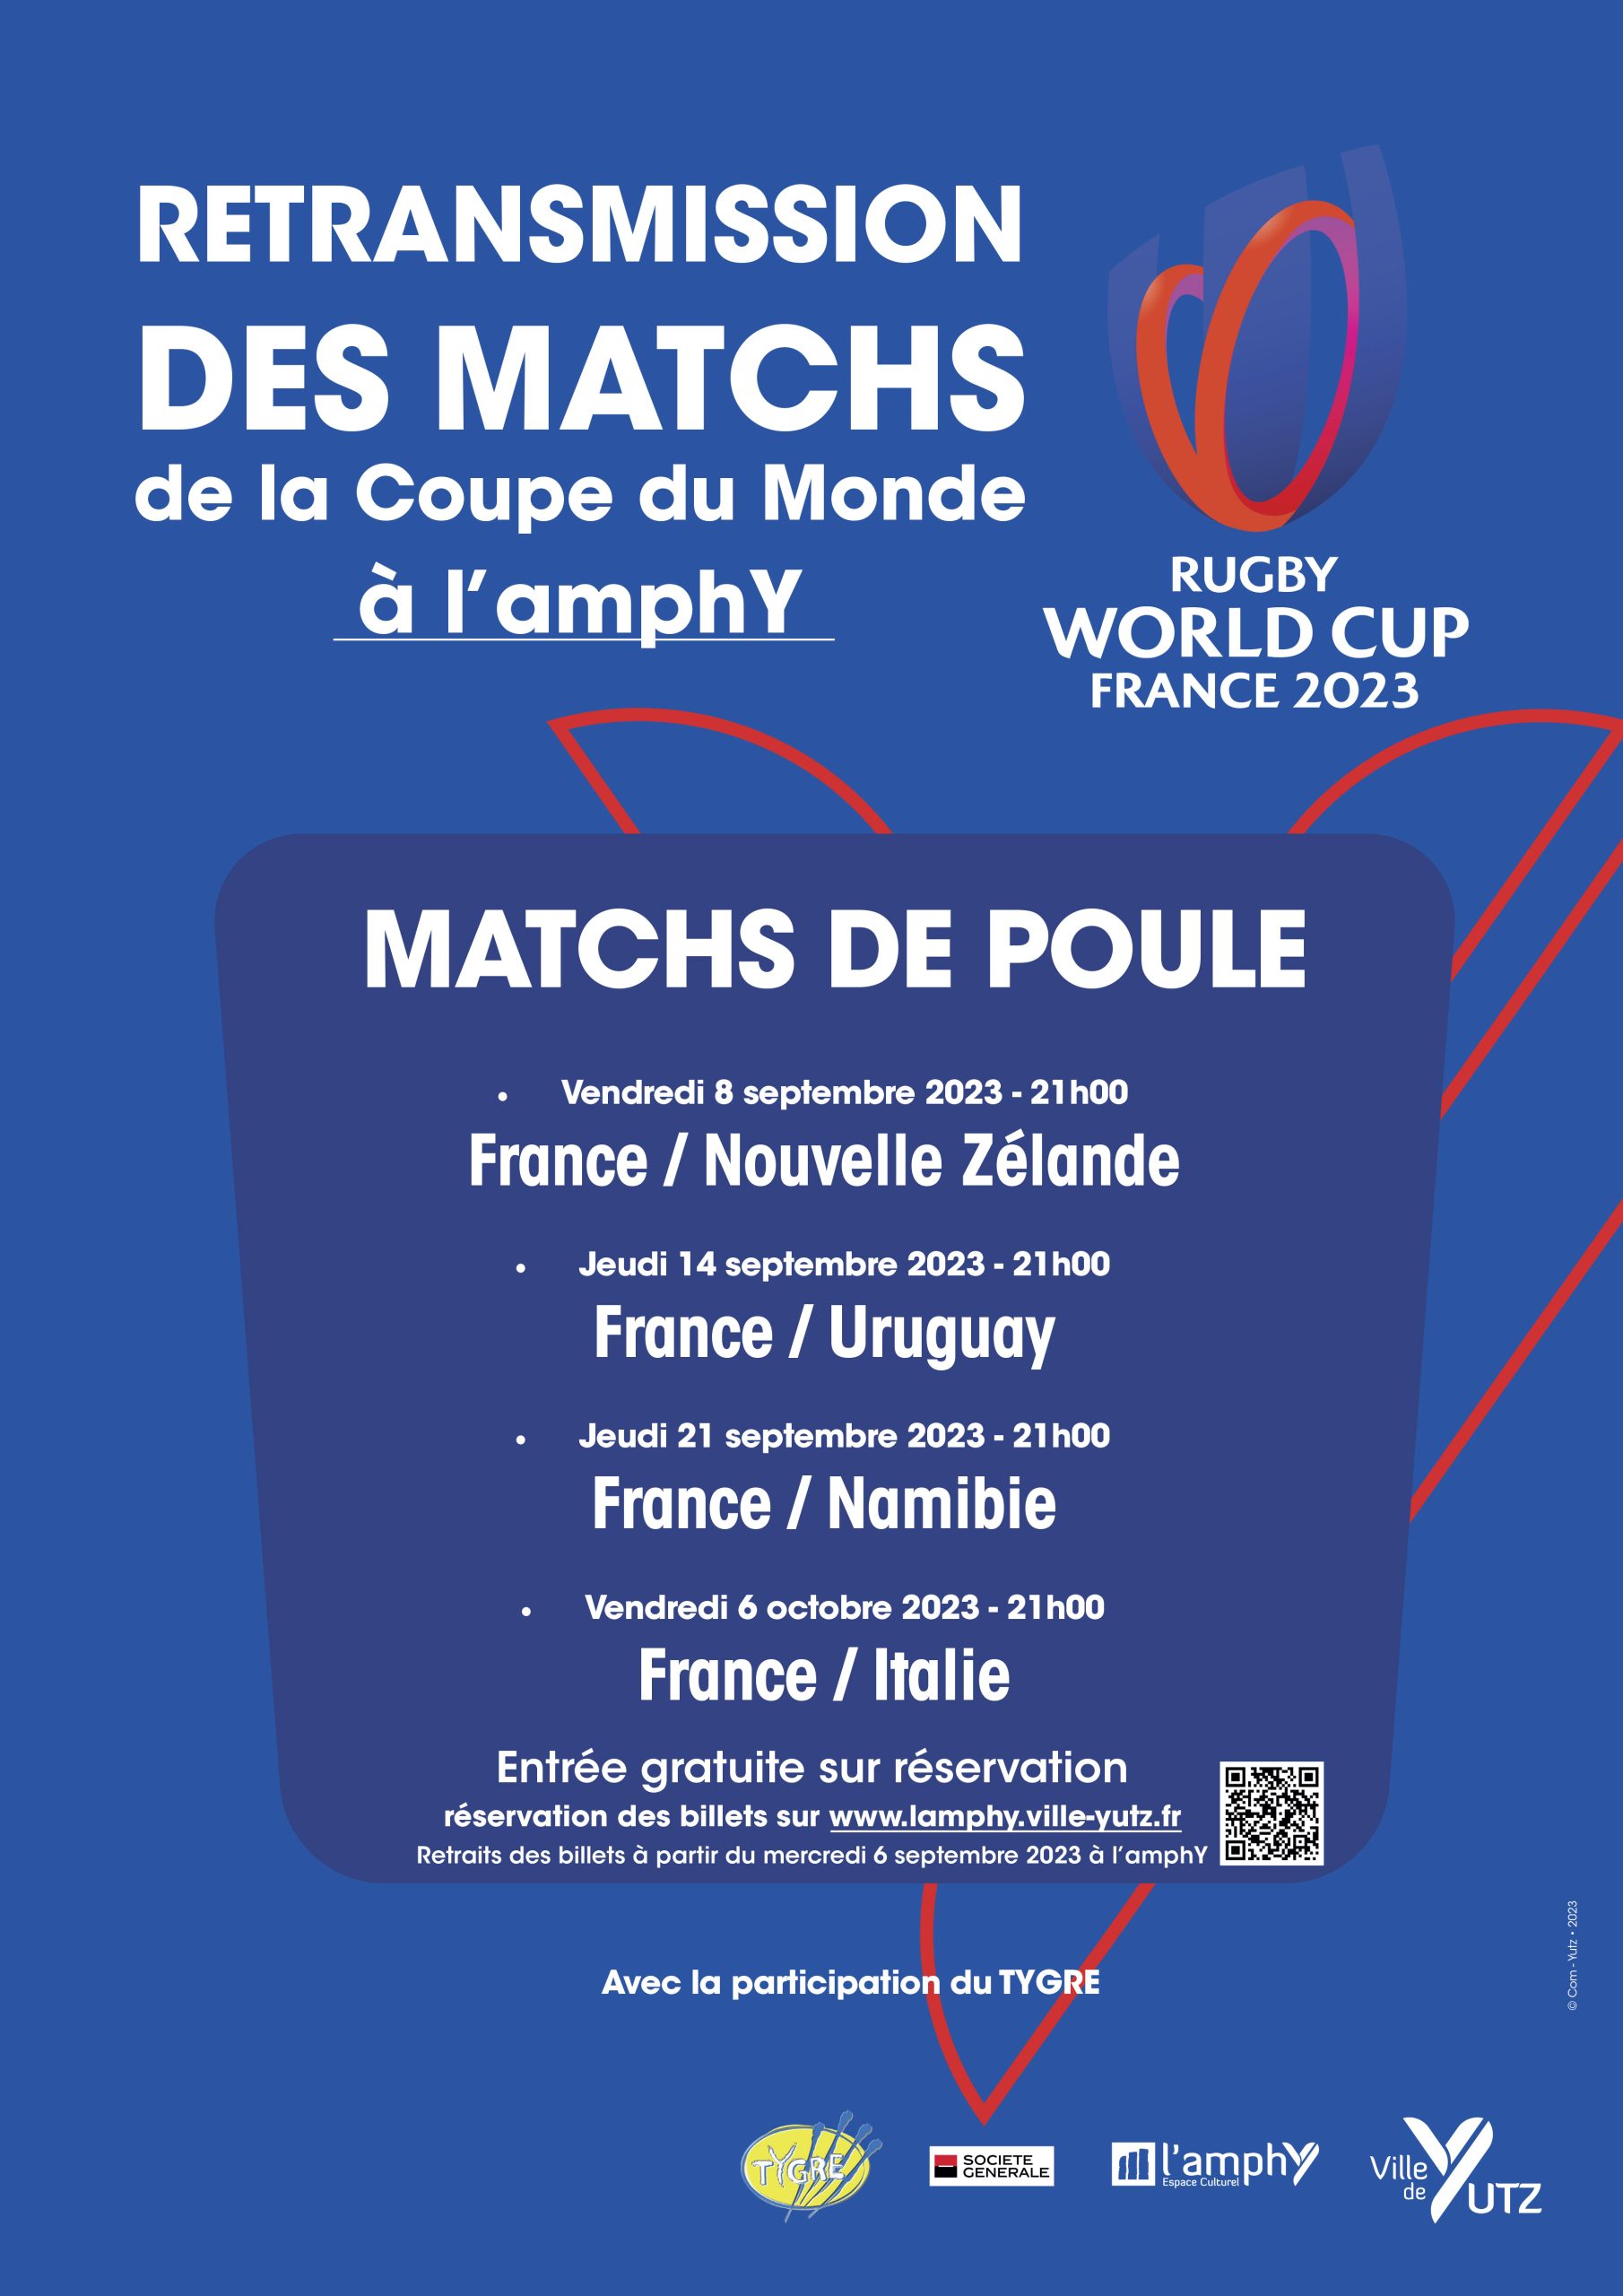 Retransmission of the Rugby Match: France / Uruguay